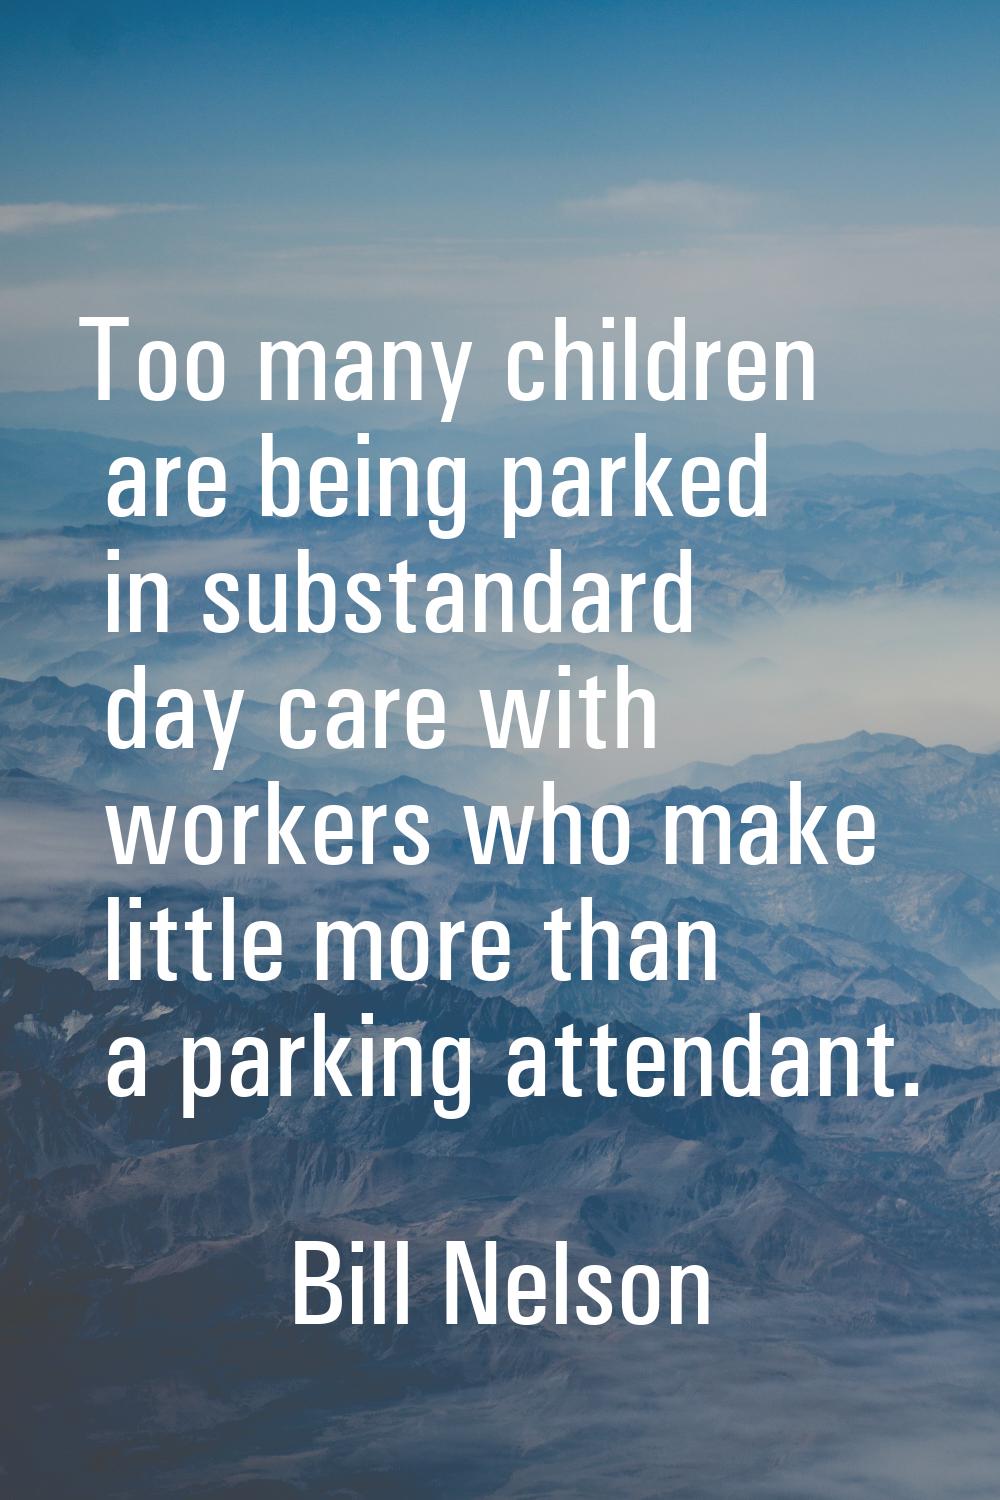 Too many children are being parked in substandard day care with workers who make little more than a